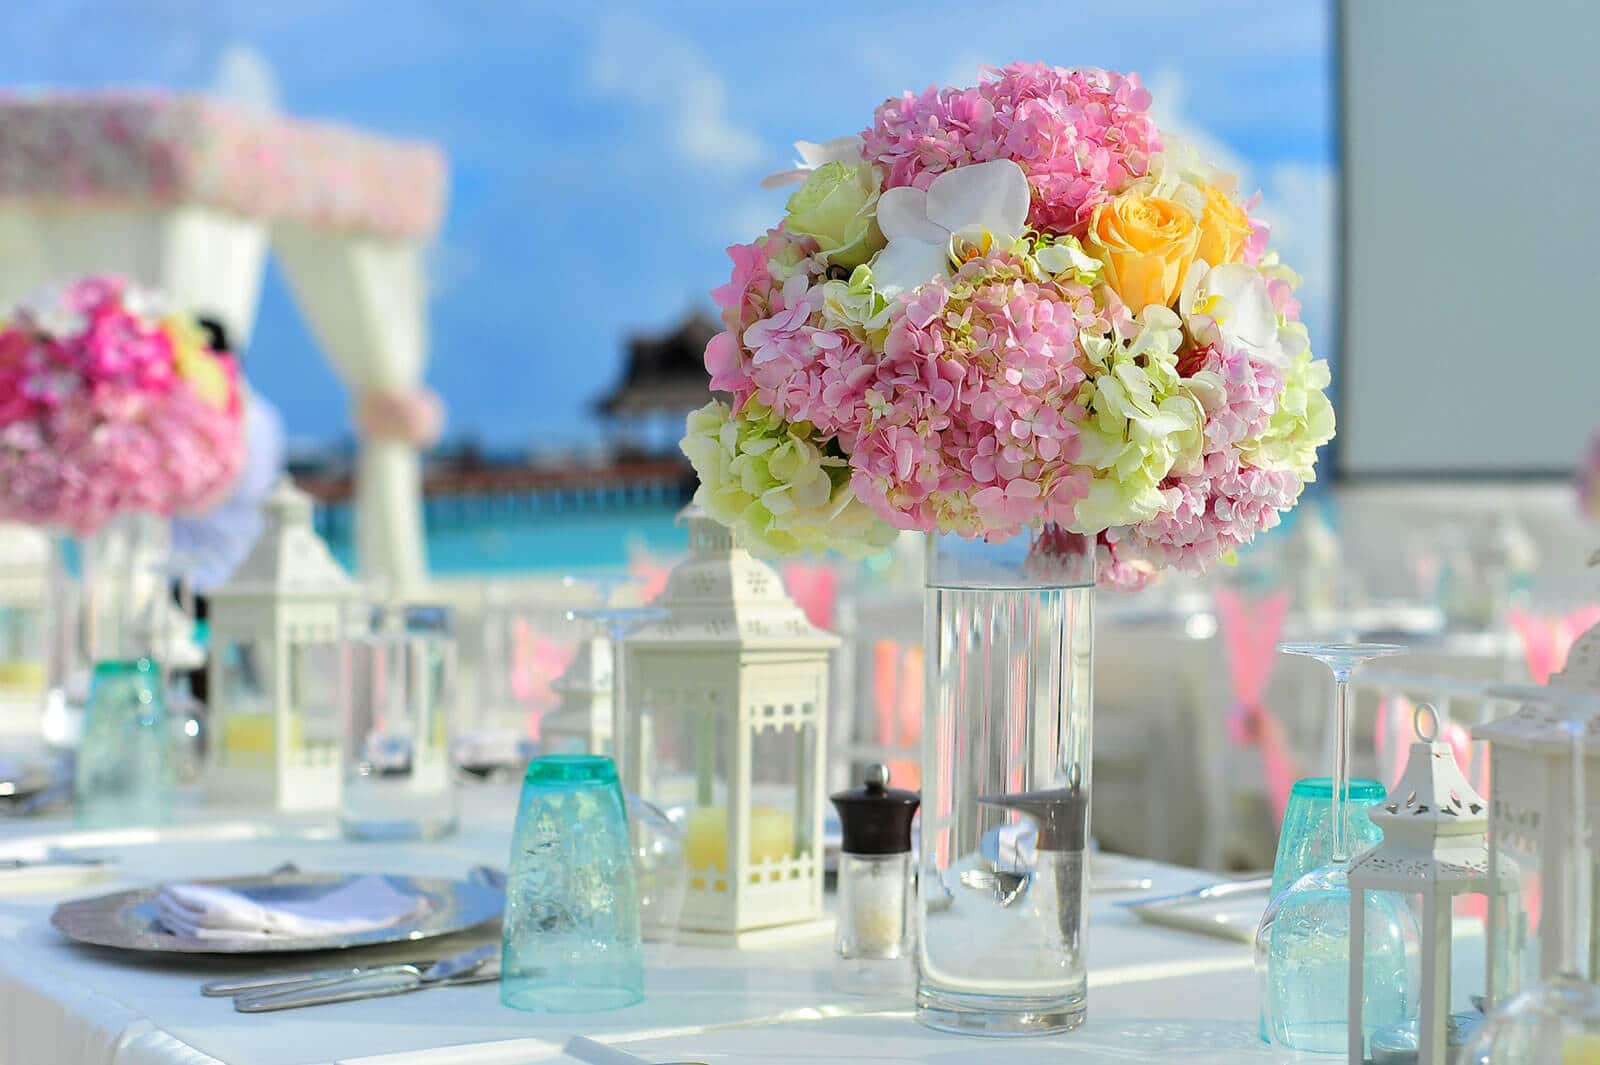 Table set with dishes and silverware and vases with colorful bouquets